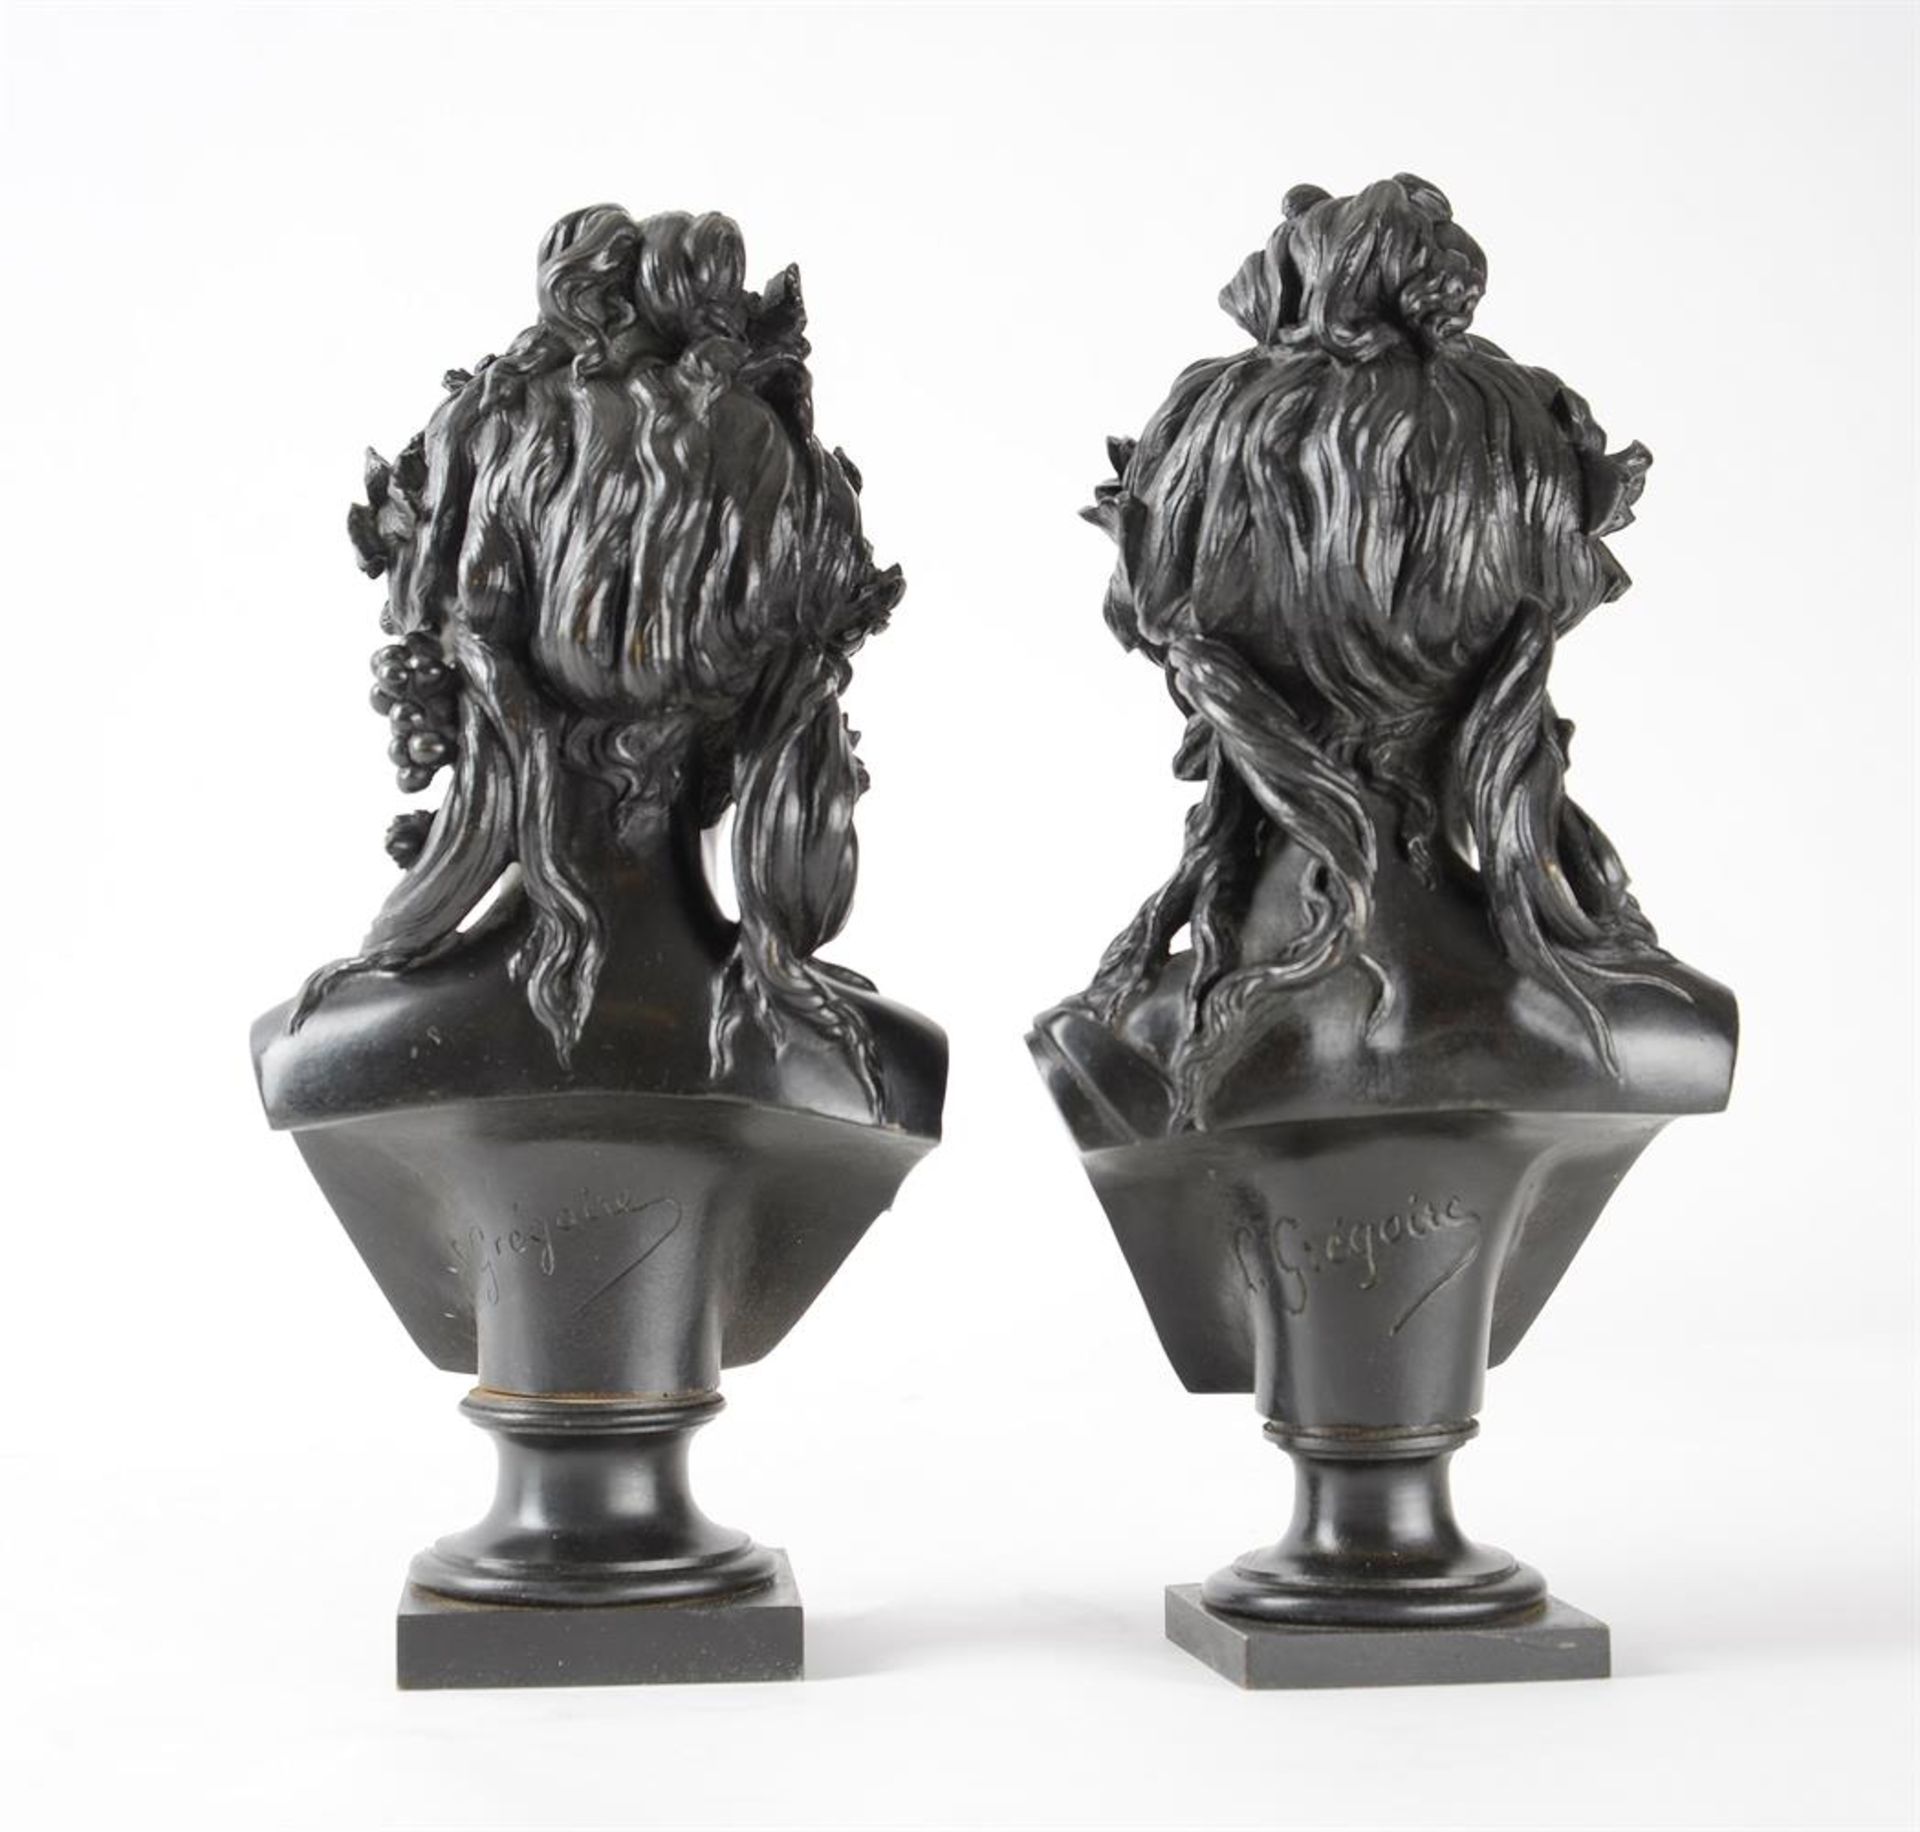 AFTER JEAN-LOUIS GREGOIRE (FRENCH, 1840-1890), A PAIR OF BRONZE BUSTS OF YOUNG WOMEN - Image 3 of 5